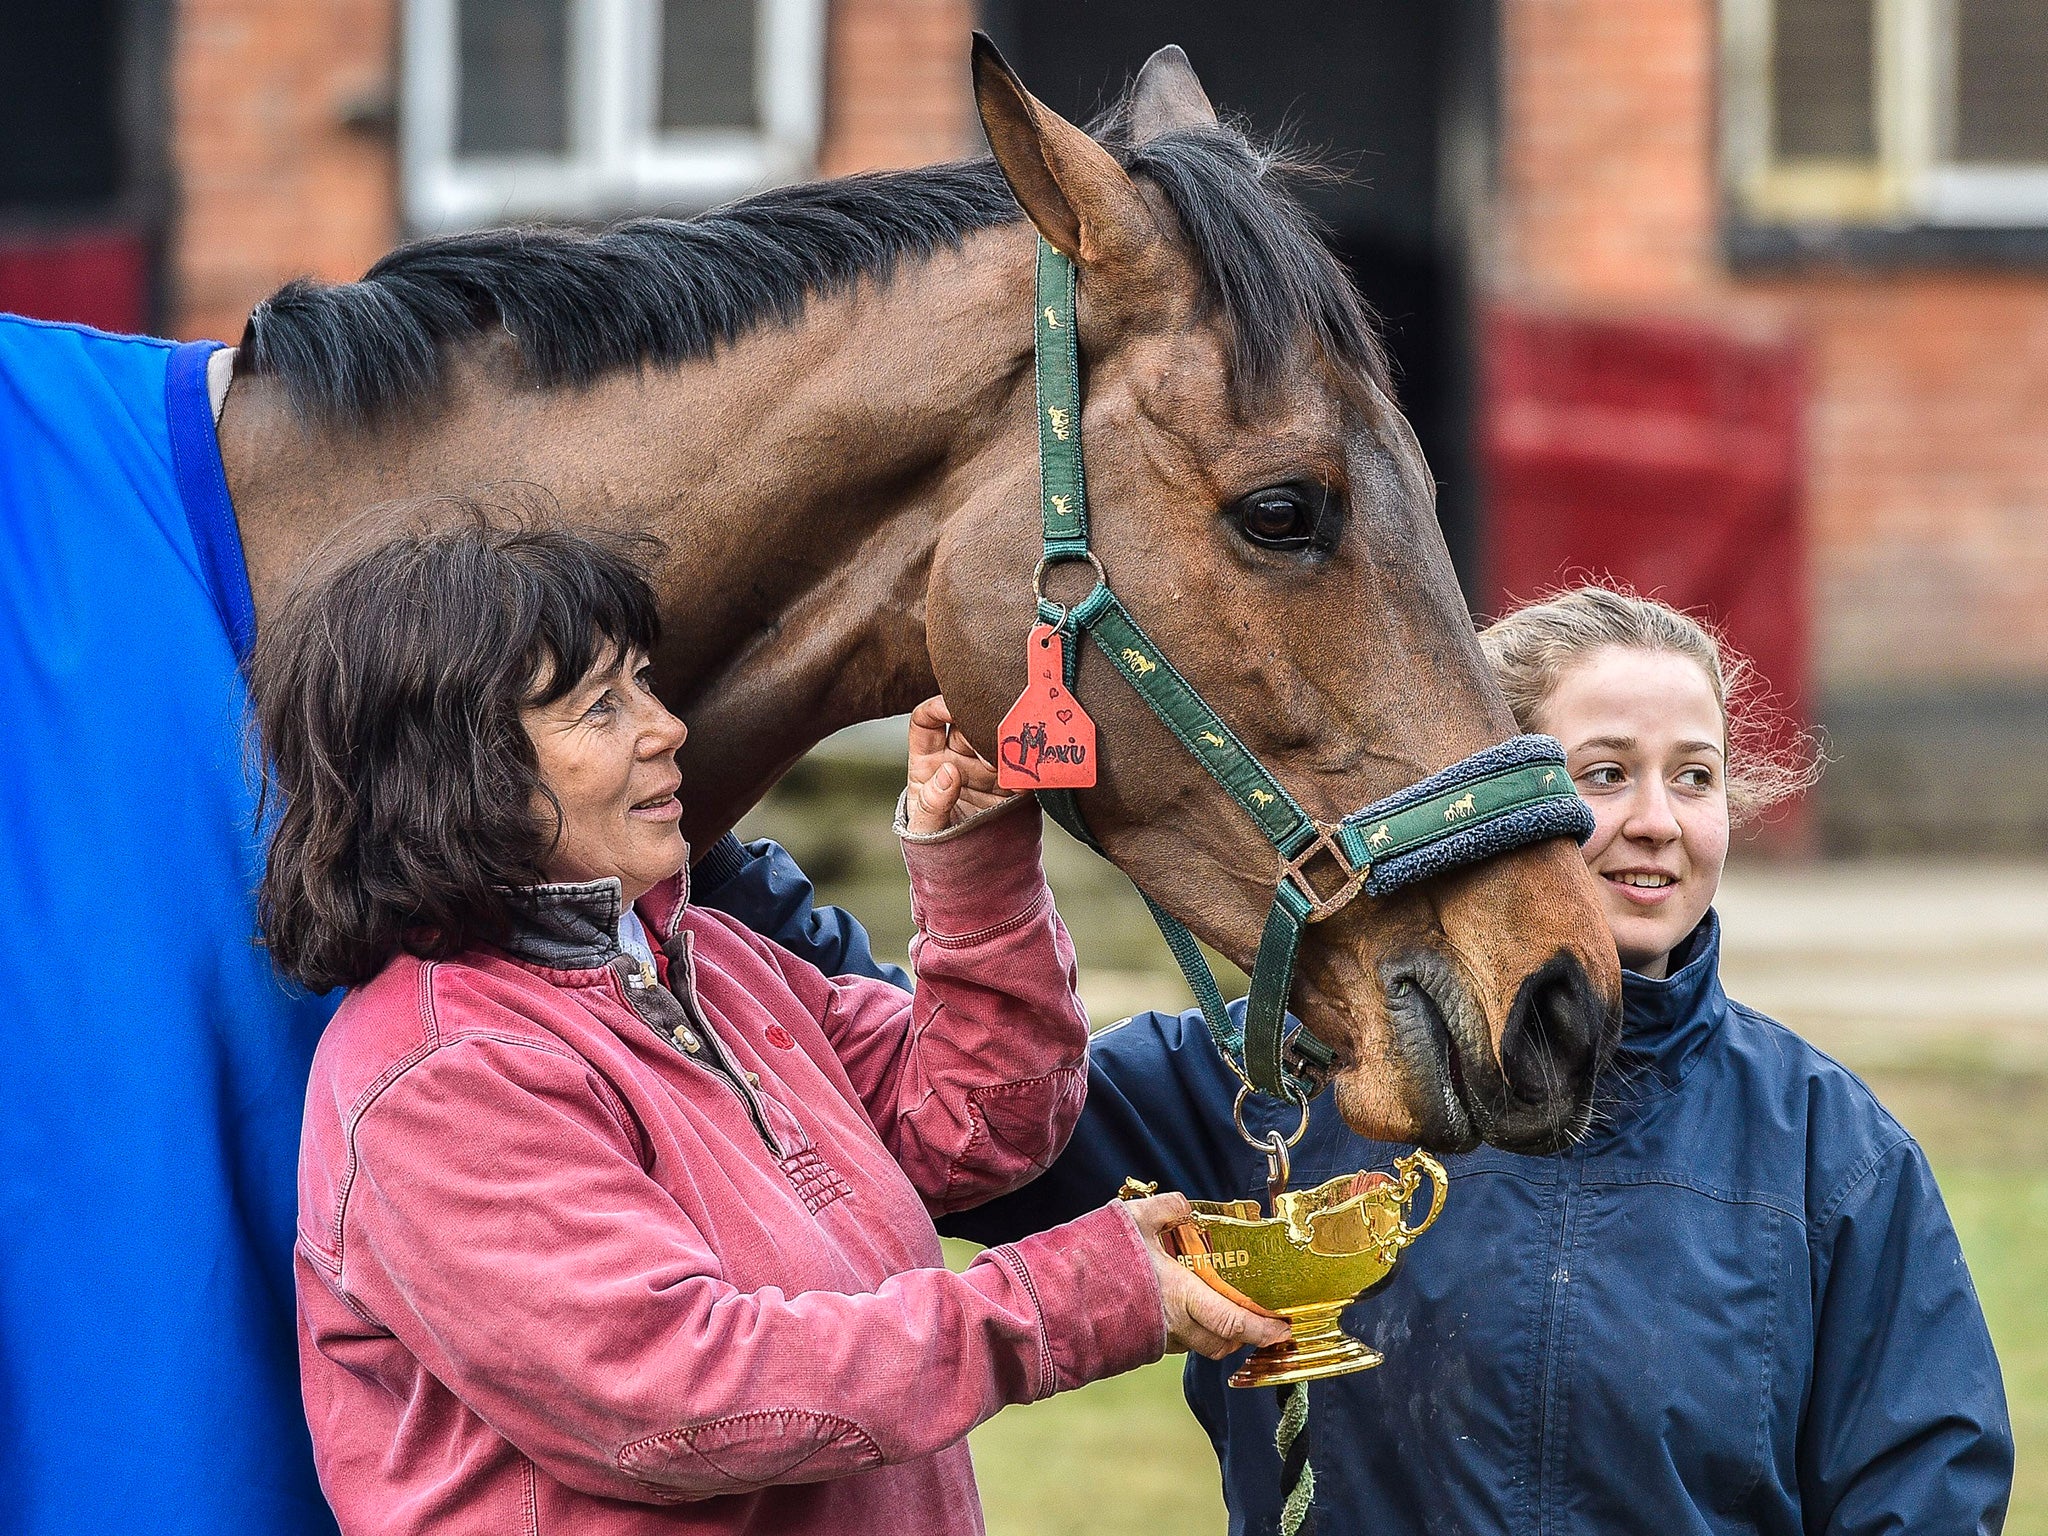 Rich pickings: Cheltenham Gold Cup winner Coneygree eats from the trophy, accompanied by owner Sara Bradstock (left) and her daughter Lily